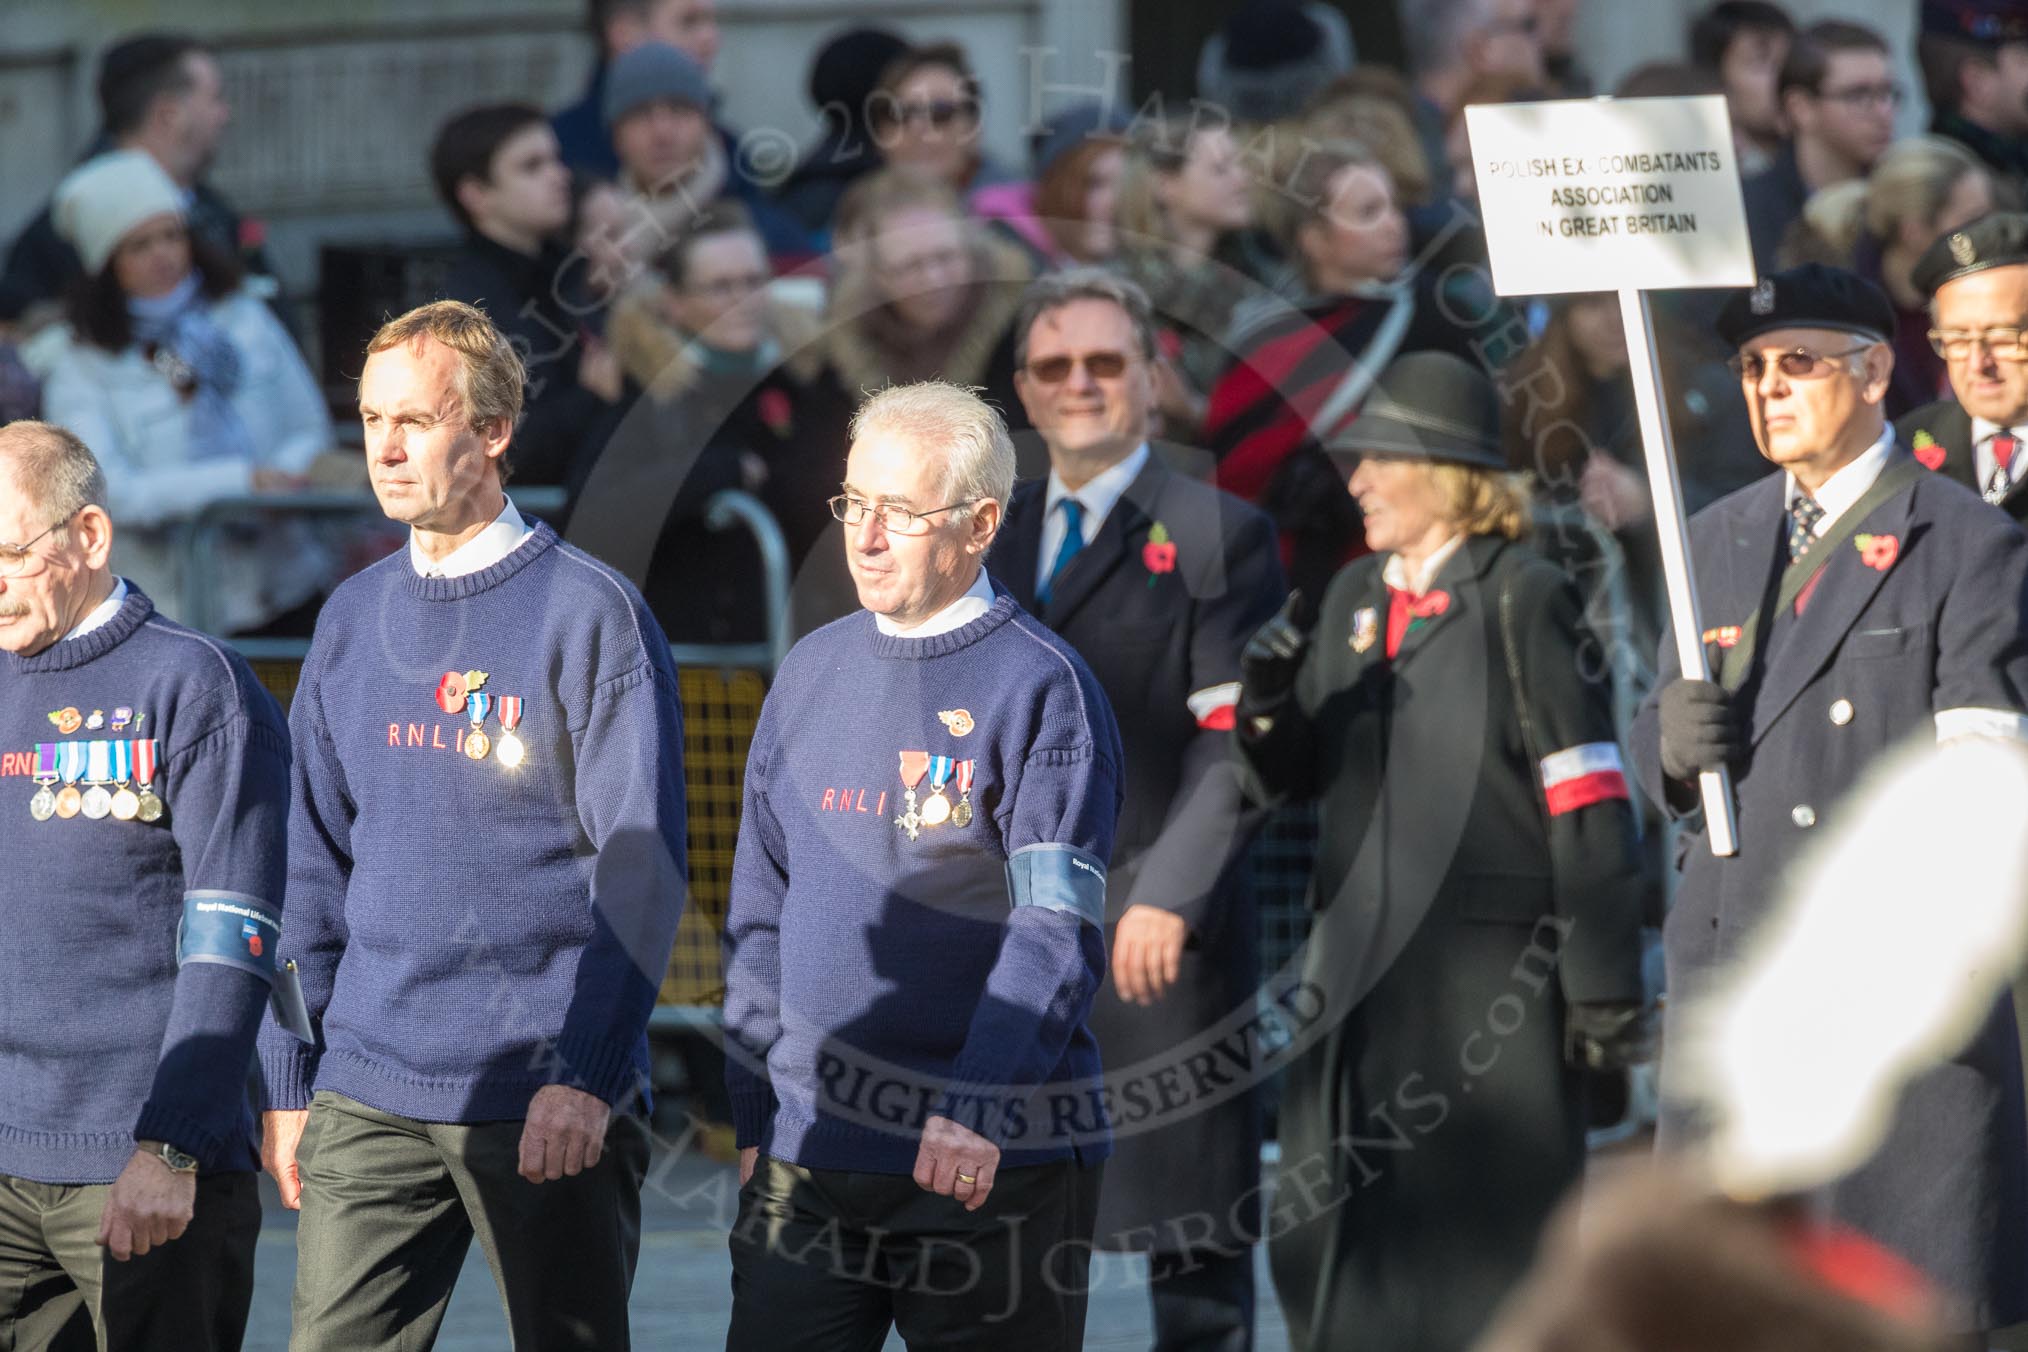 March Past, Remembrance Sunday at the Cenotaph 2016: M42 SPPW - Friends of Polish Veterans Association.
Cenotaph, Whitehall, London SW1,
London,
Greater London,
United Kingdom,
on 13 November 2016 at 13:19, image #2958